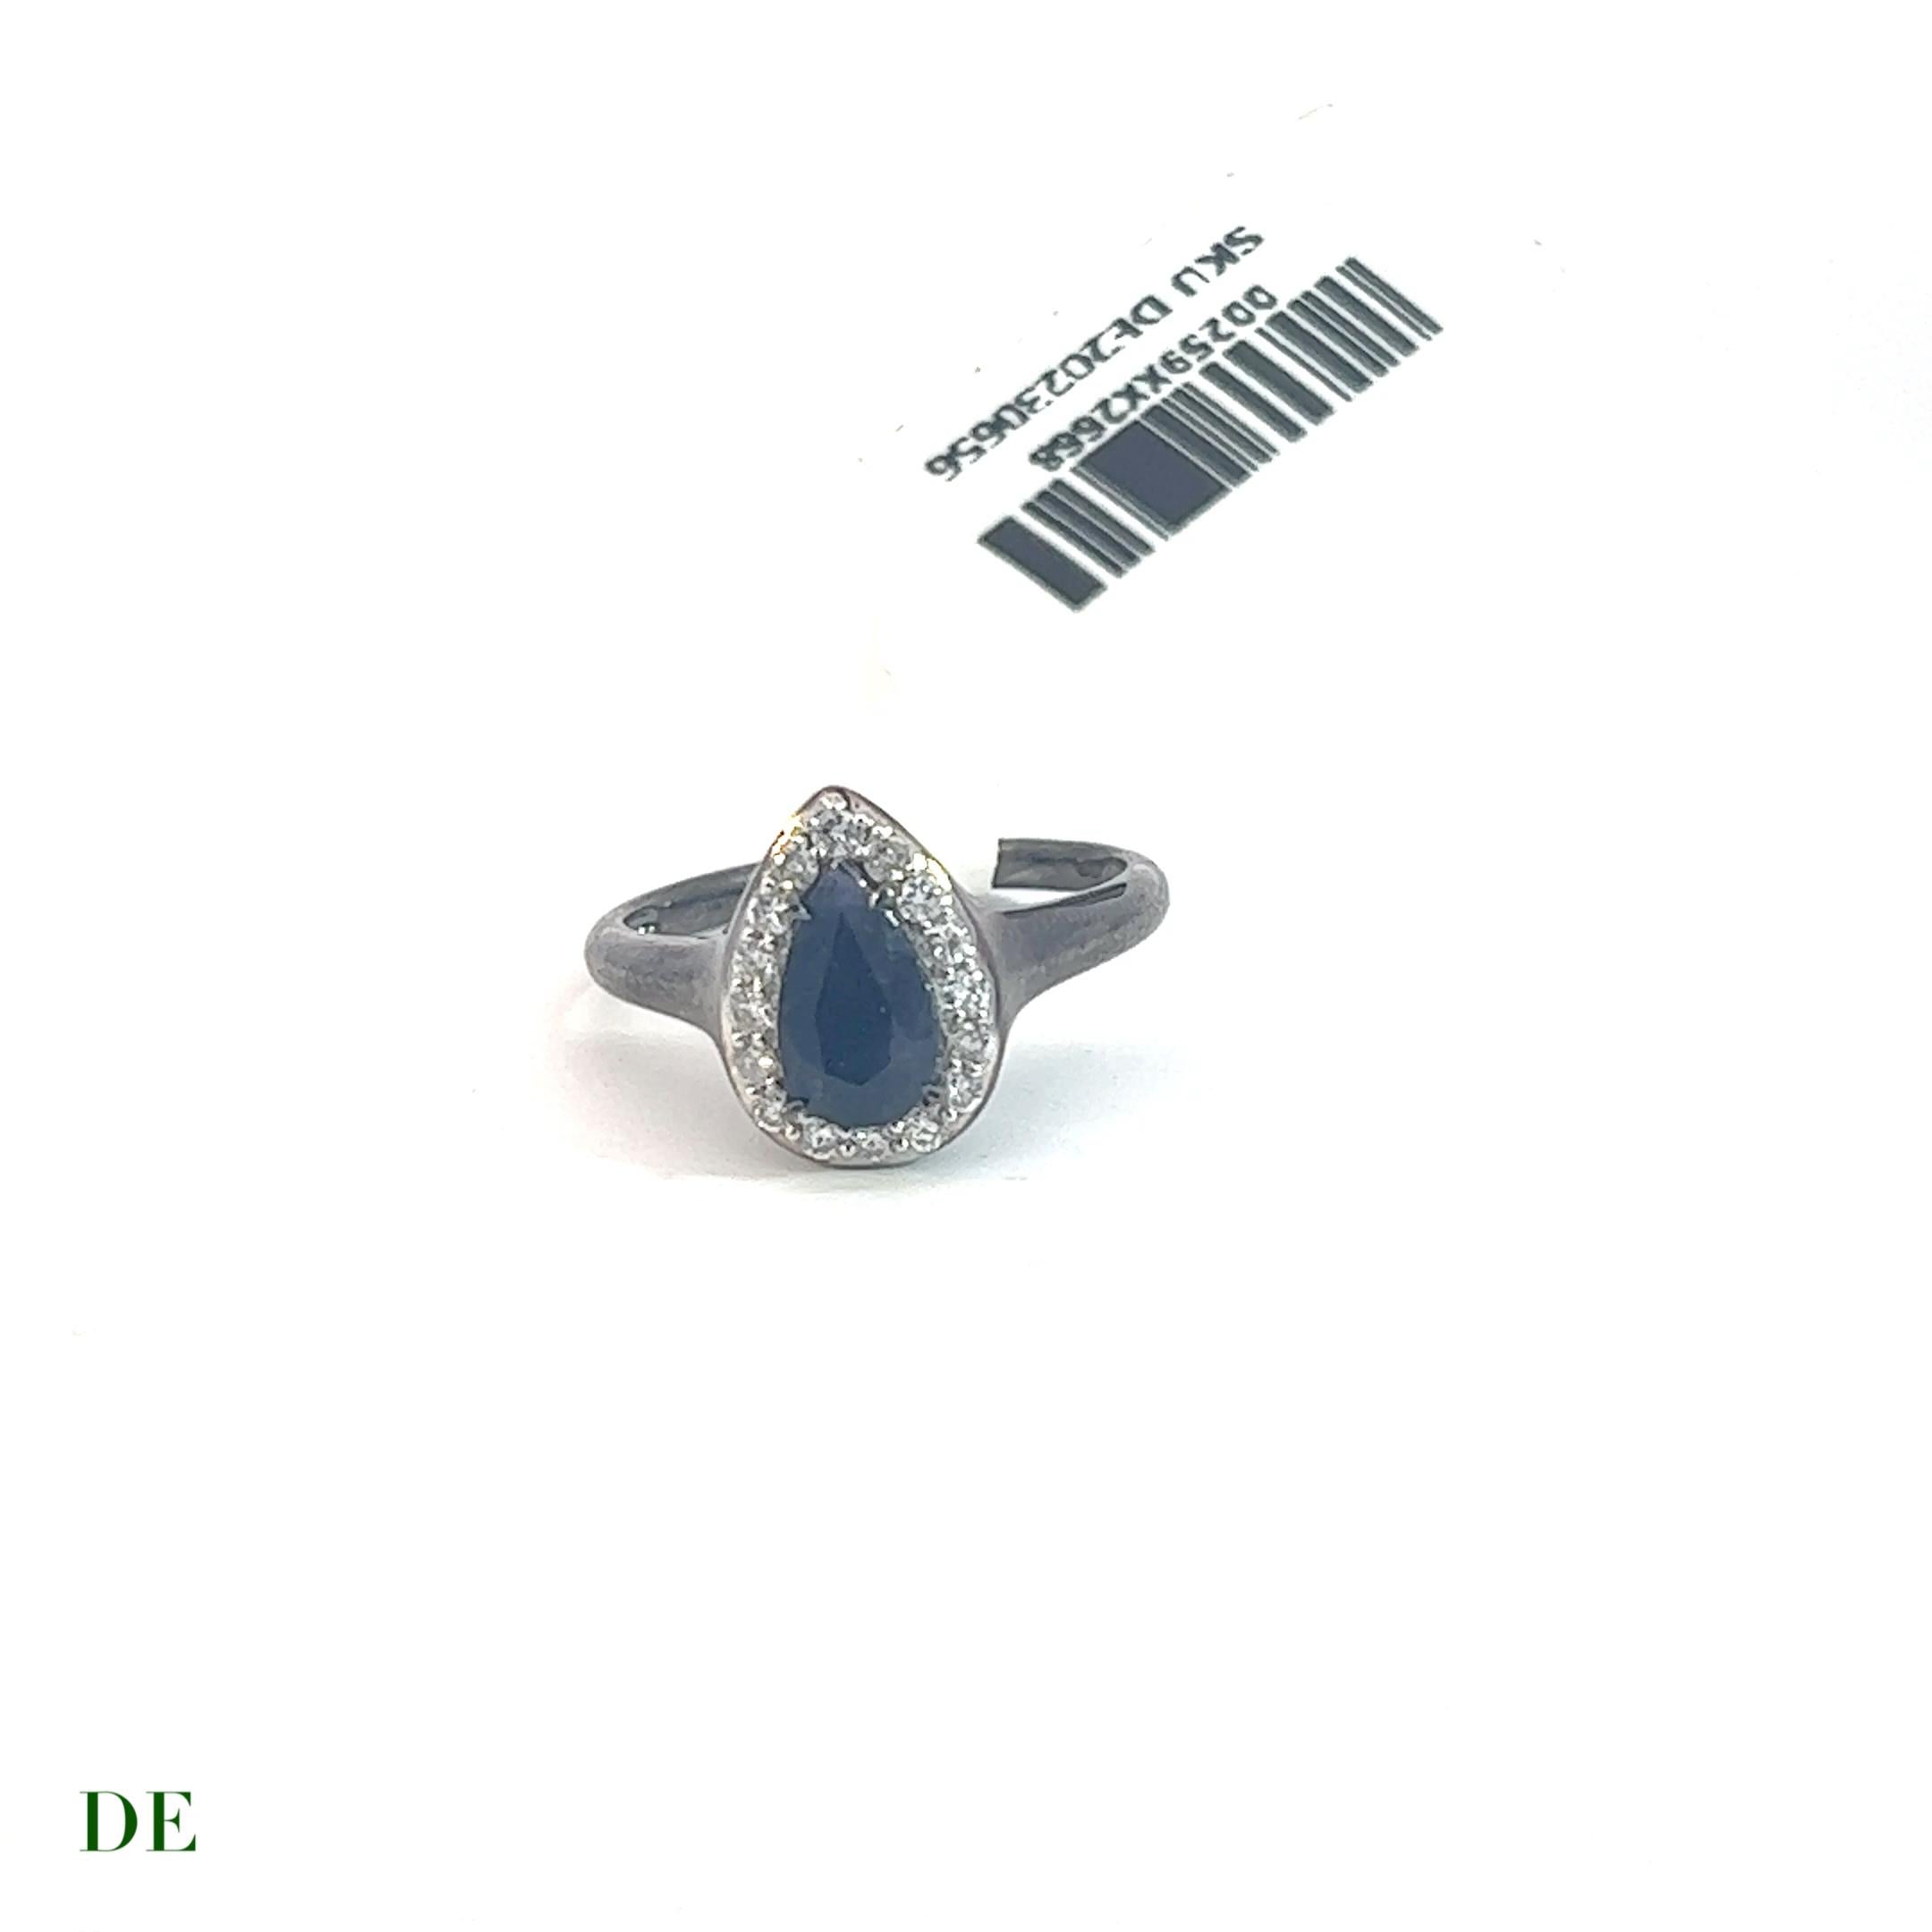 This extremely rare Kashmir sapphire and diamond ring is a true masterpiece that exudes luxury and opulence. The centerpiece of the ring is an exquisite Kashmir sapphire gemstone that weighs approximately 1.2 carats and boasts a stunning deep blue